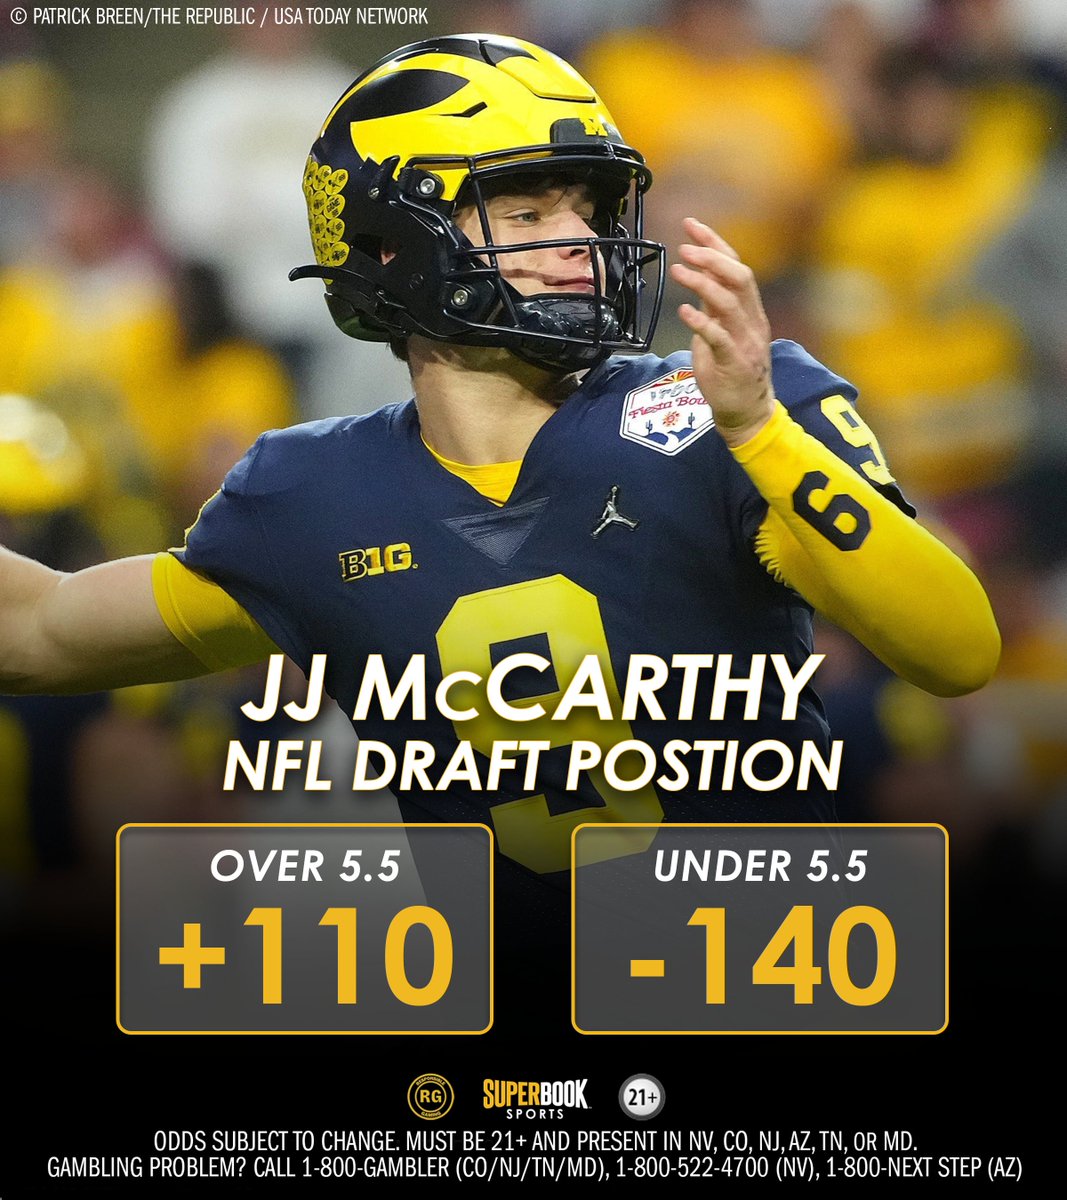 When will JJ McCarthy hear his name get called? #NFLDraft